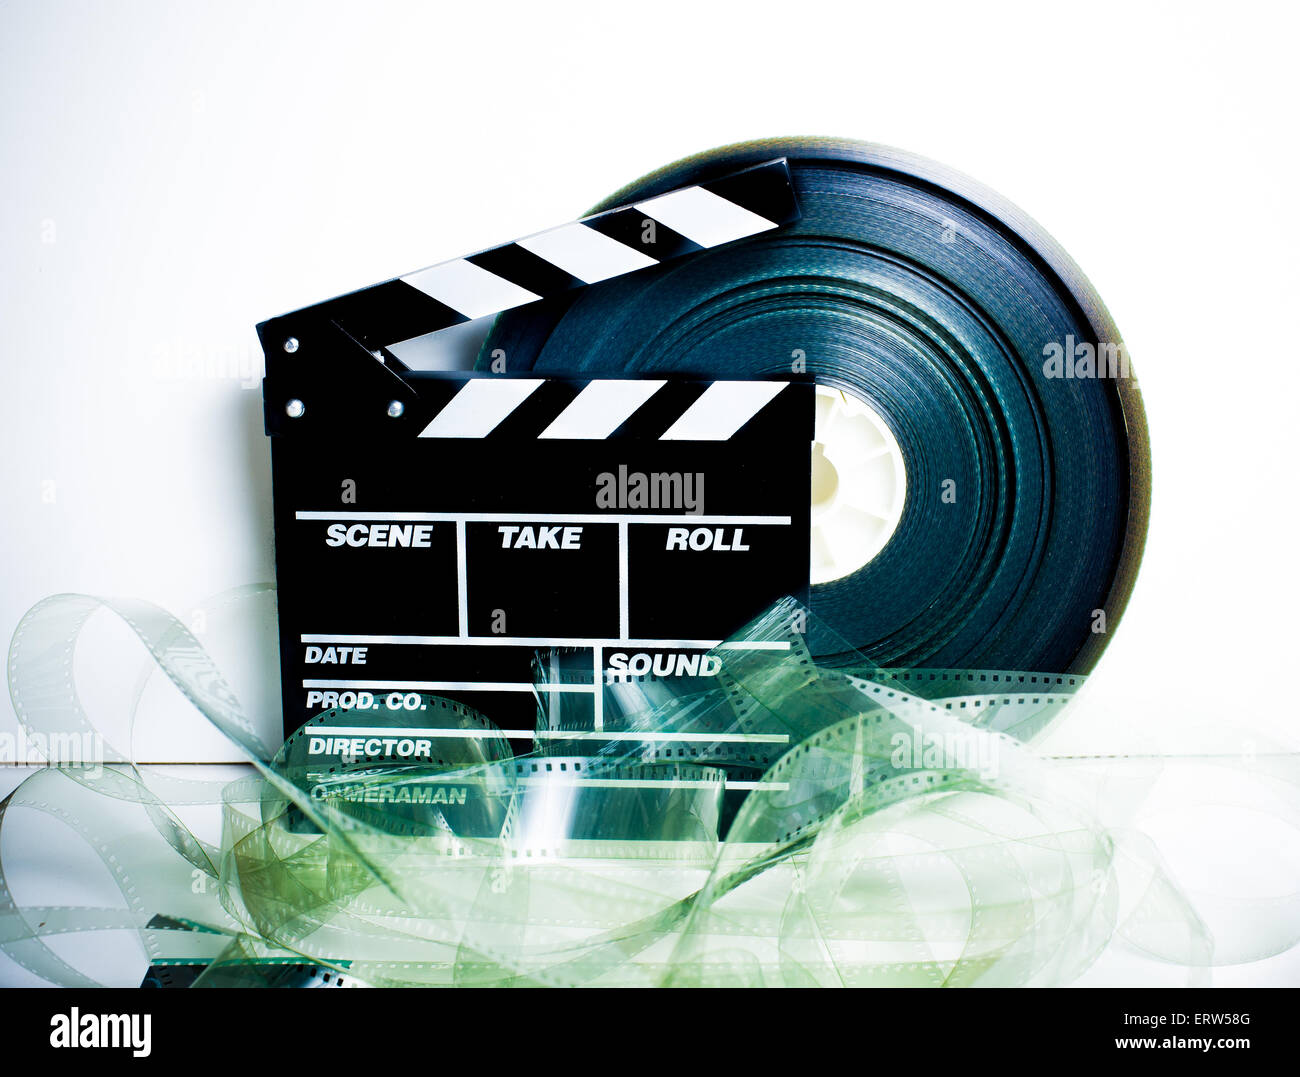 https://c8.alamy.com/comp/ERW58G/movie-clapper-board-and-35-mm-film-reel-on-white-background-vintage-ERW58G.jpg